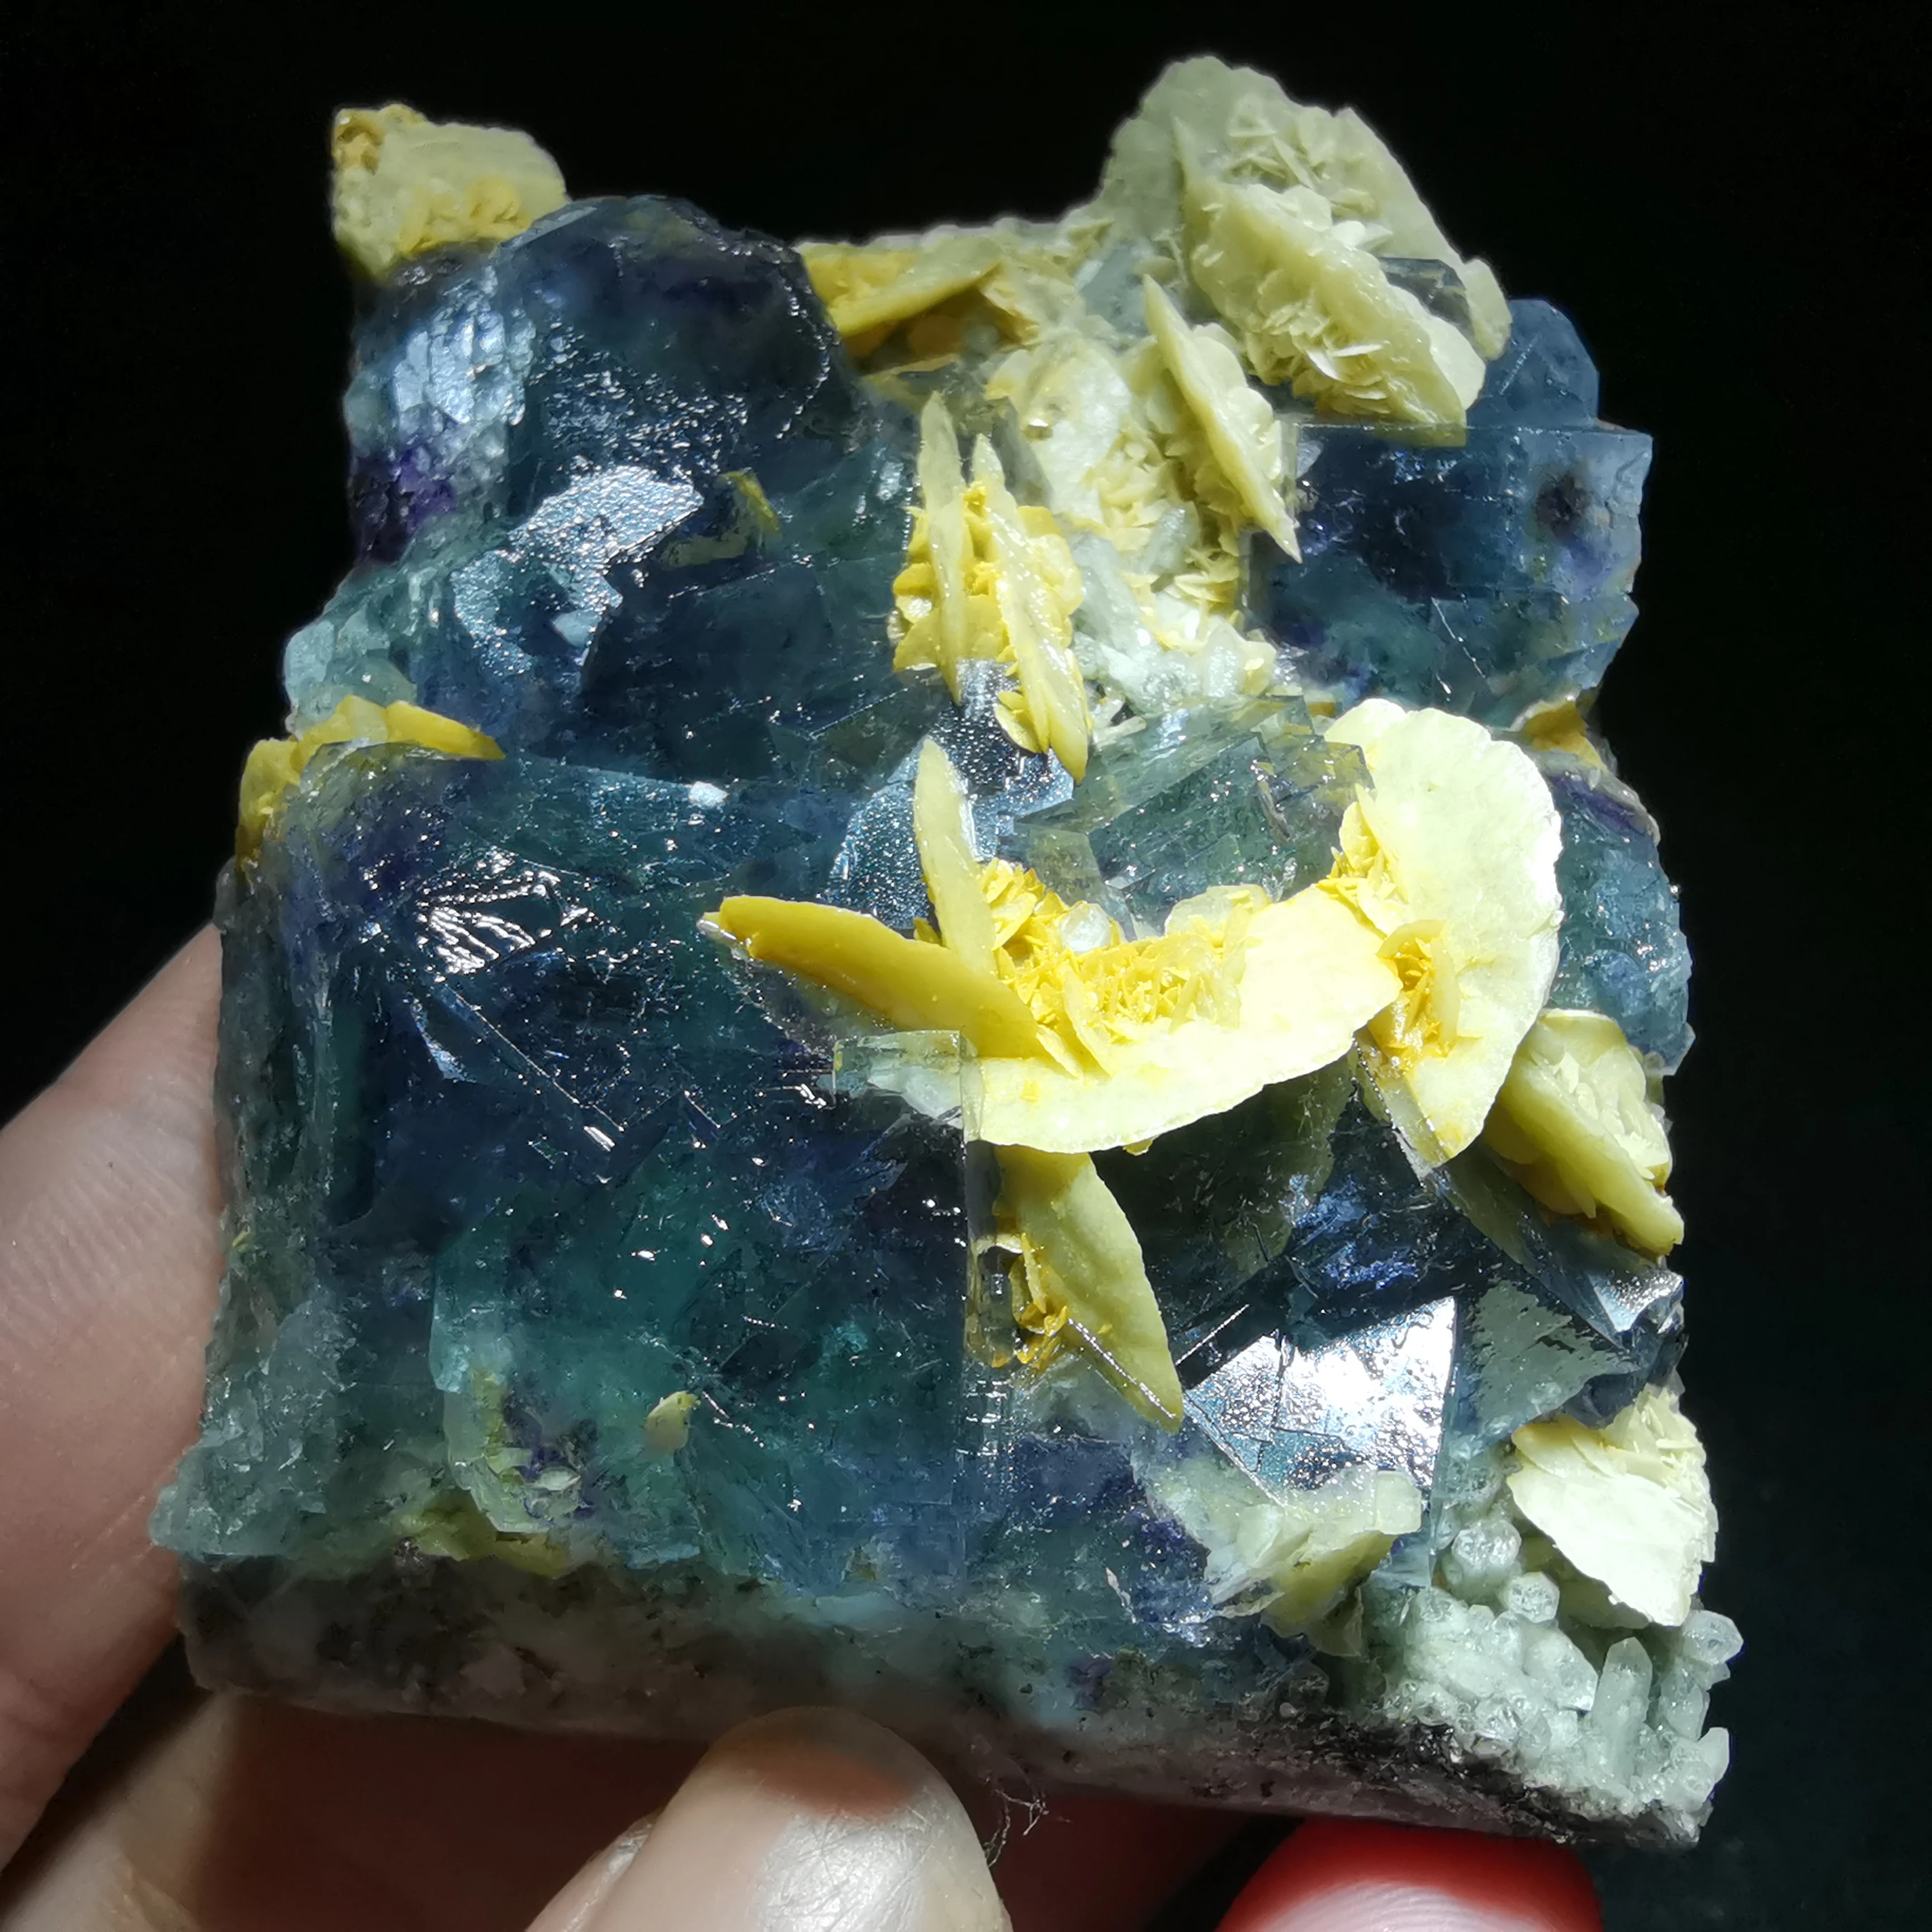 

97.6gNatural rare blue purple fluorite and mica associated mineral specimen stone and crystal healing energy CRYSTAL QUARTZ GEM